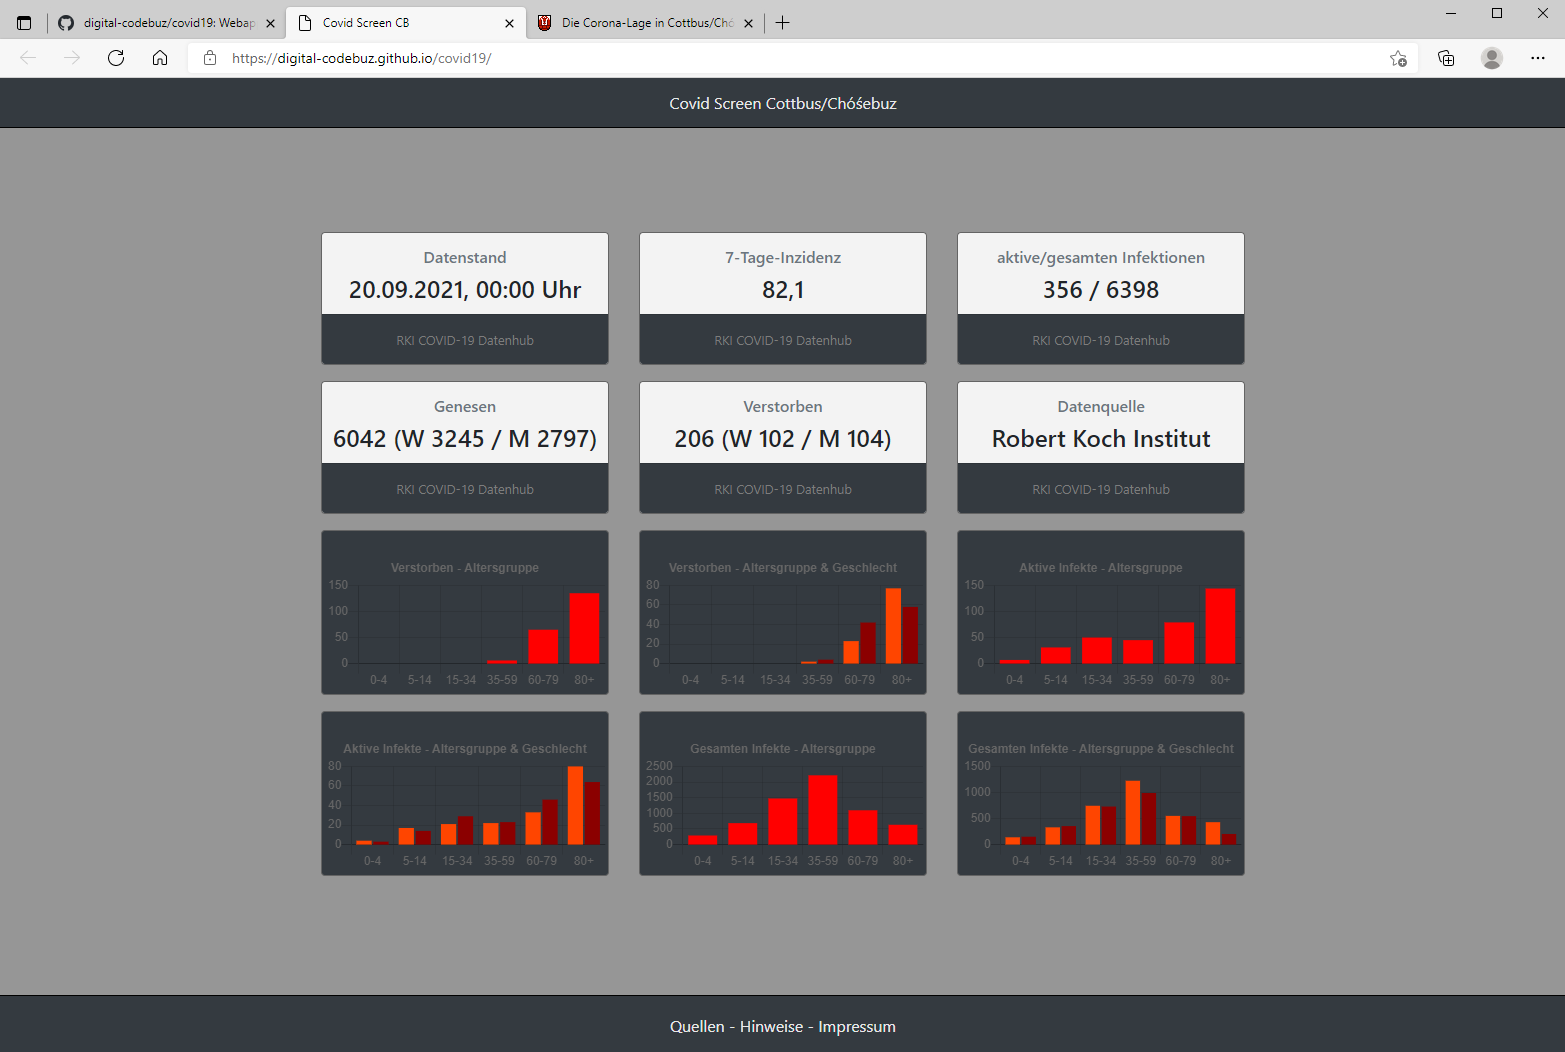 This is a Screenshot of the Dashboard for Covid-19 Data in Cottbus